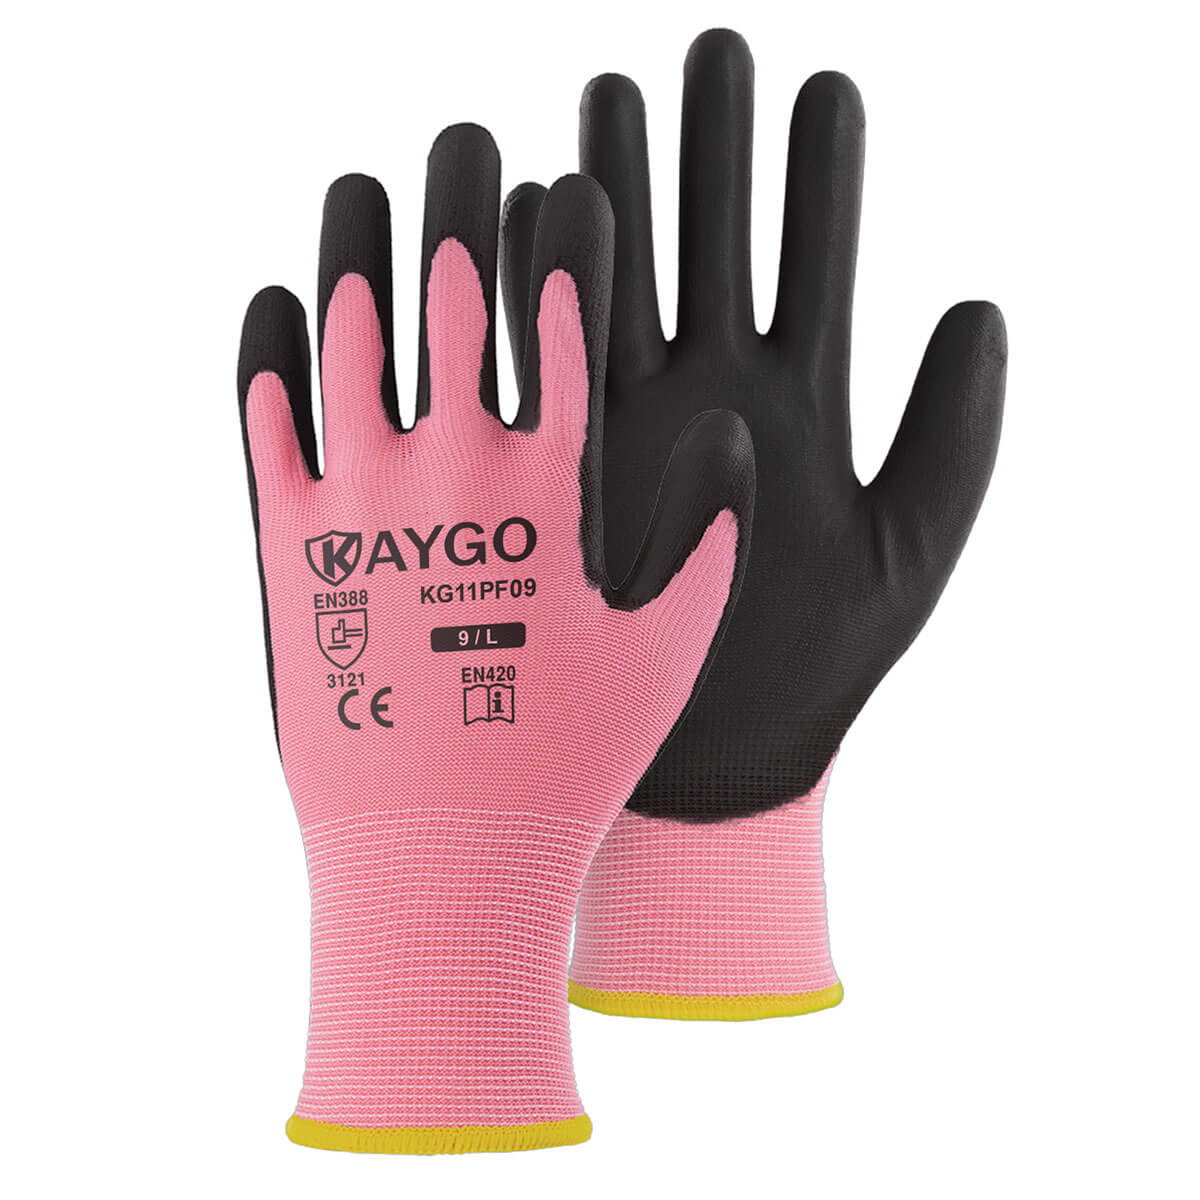 Work Gloves for men and women 12 Pairs, KAYGO KG11P, Seamless Knit Working  Glove with Polyurethane Coated for General Purpose 